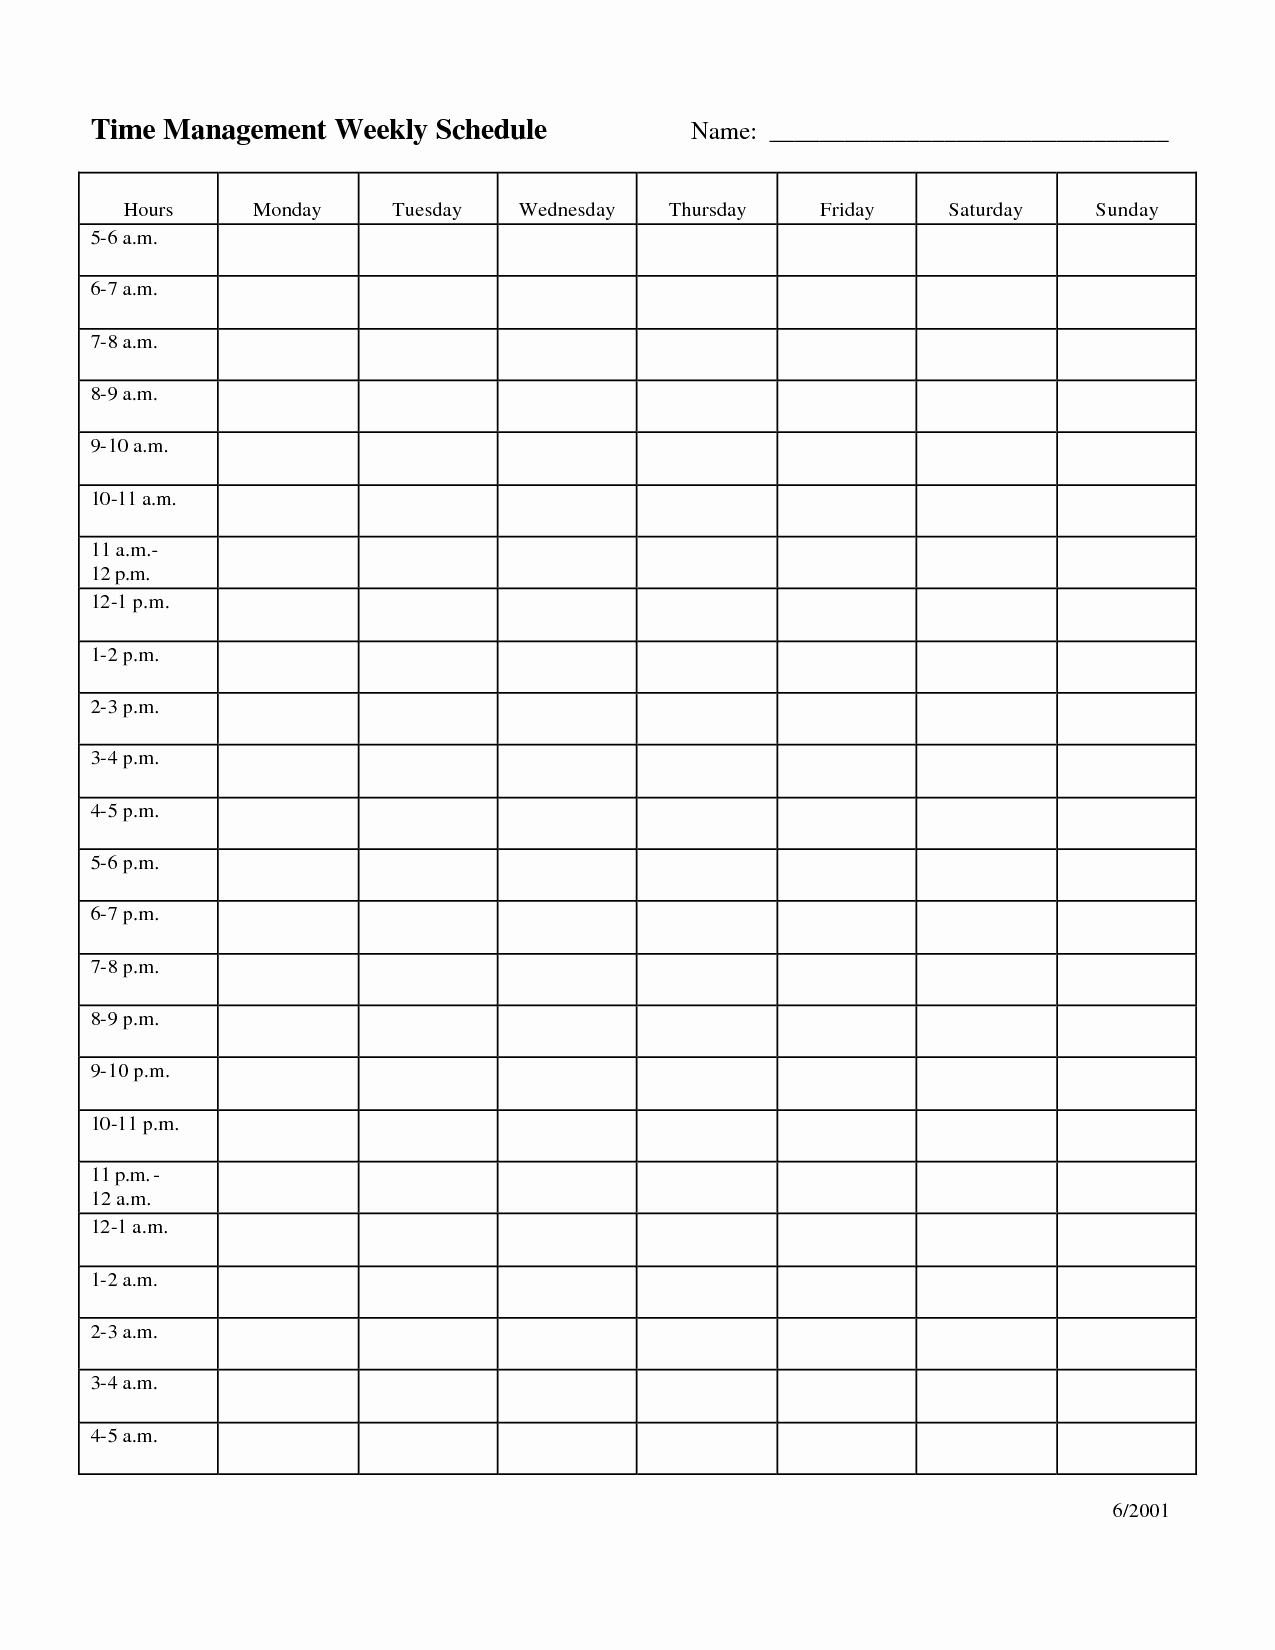 Time Management Log Template Best Of Time Management Schedule Template